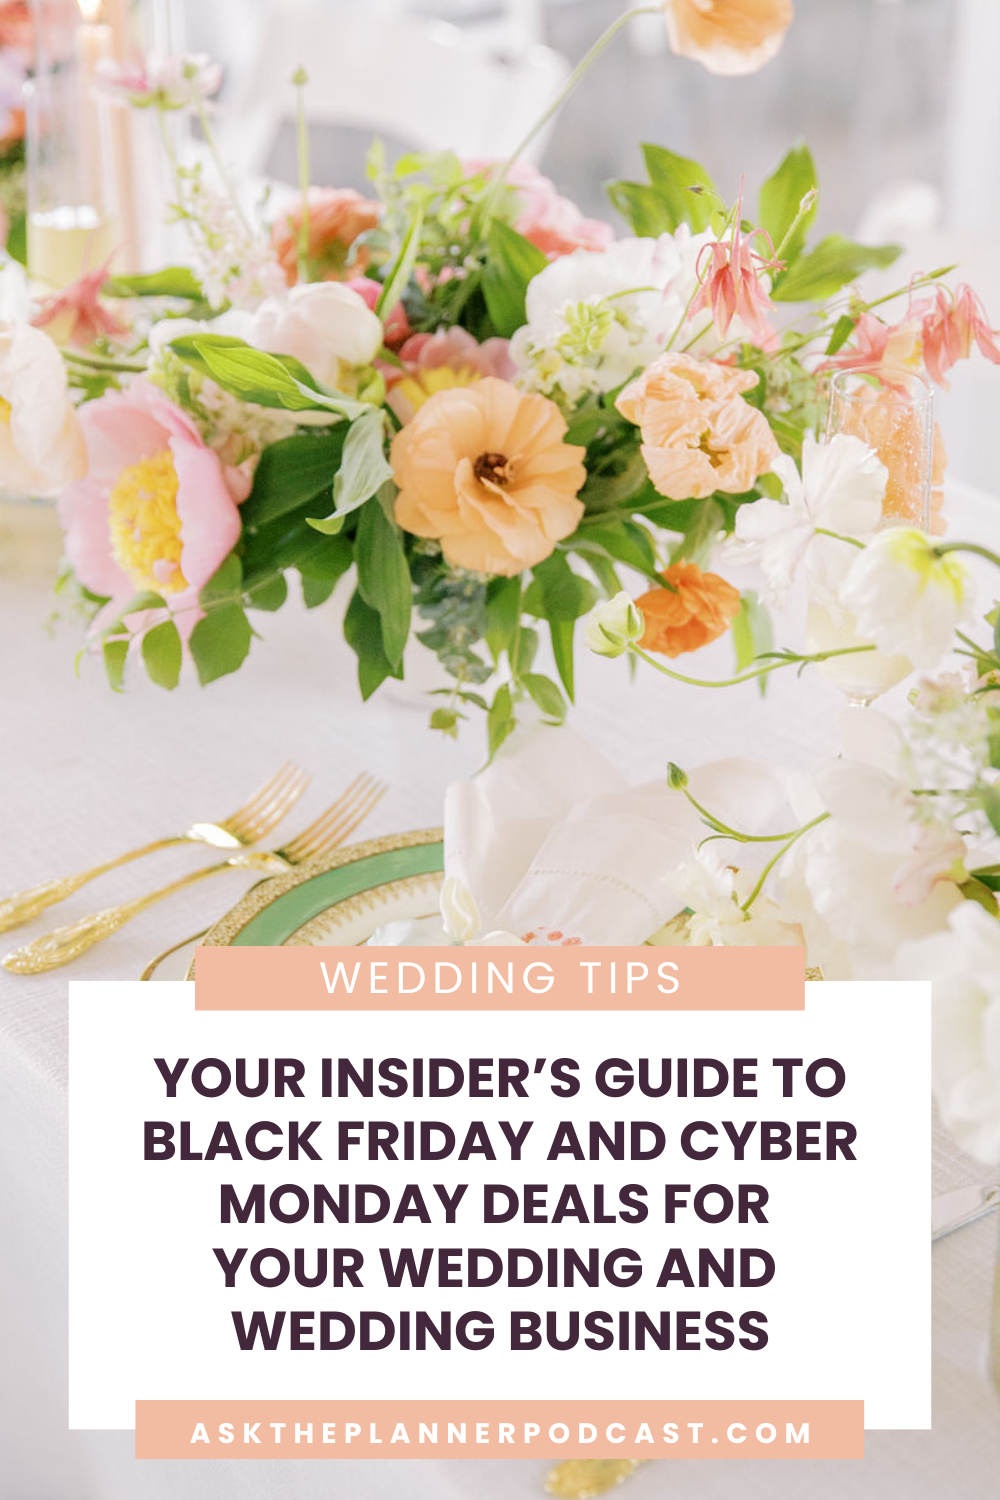 Black Friday and Cyber Monday Deals for Your Wedding and Wedding Business 